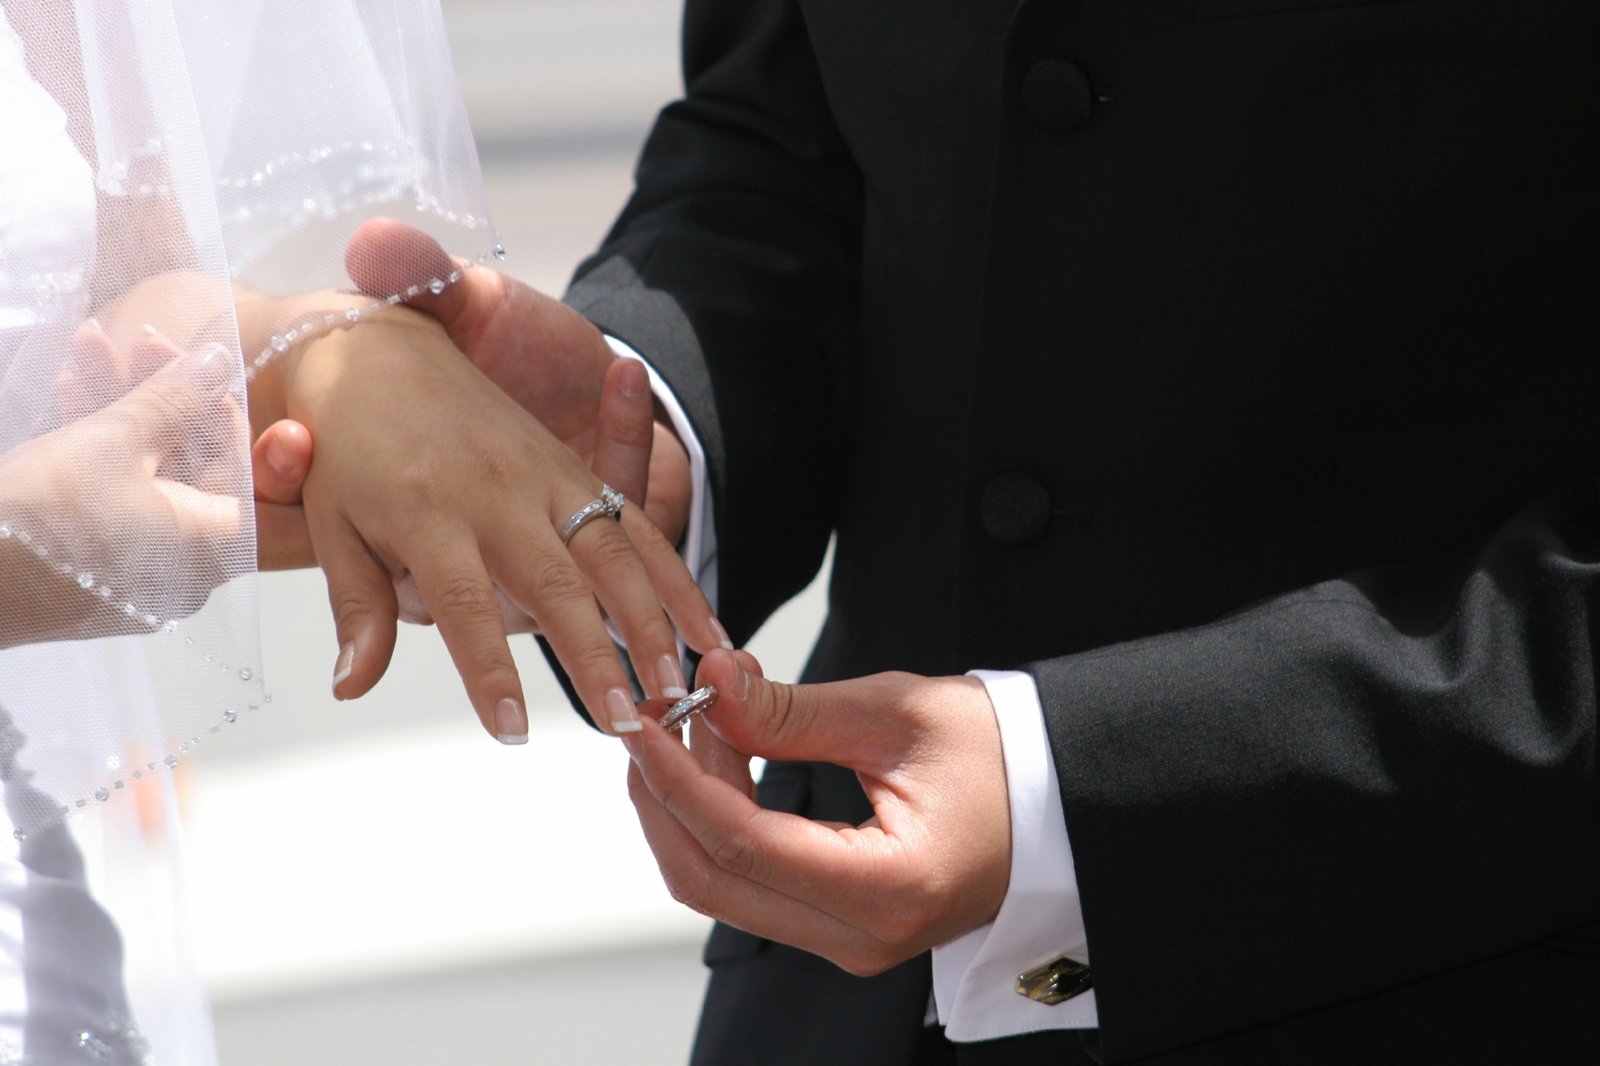 Exchanging Rings During the Ceremon